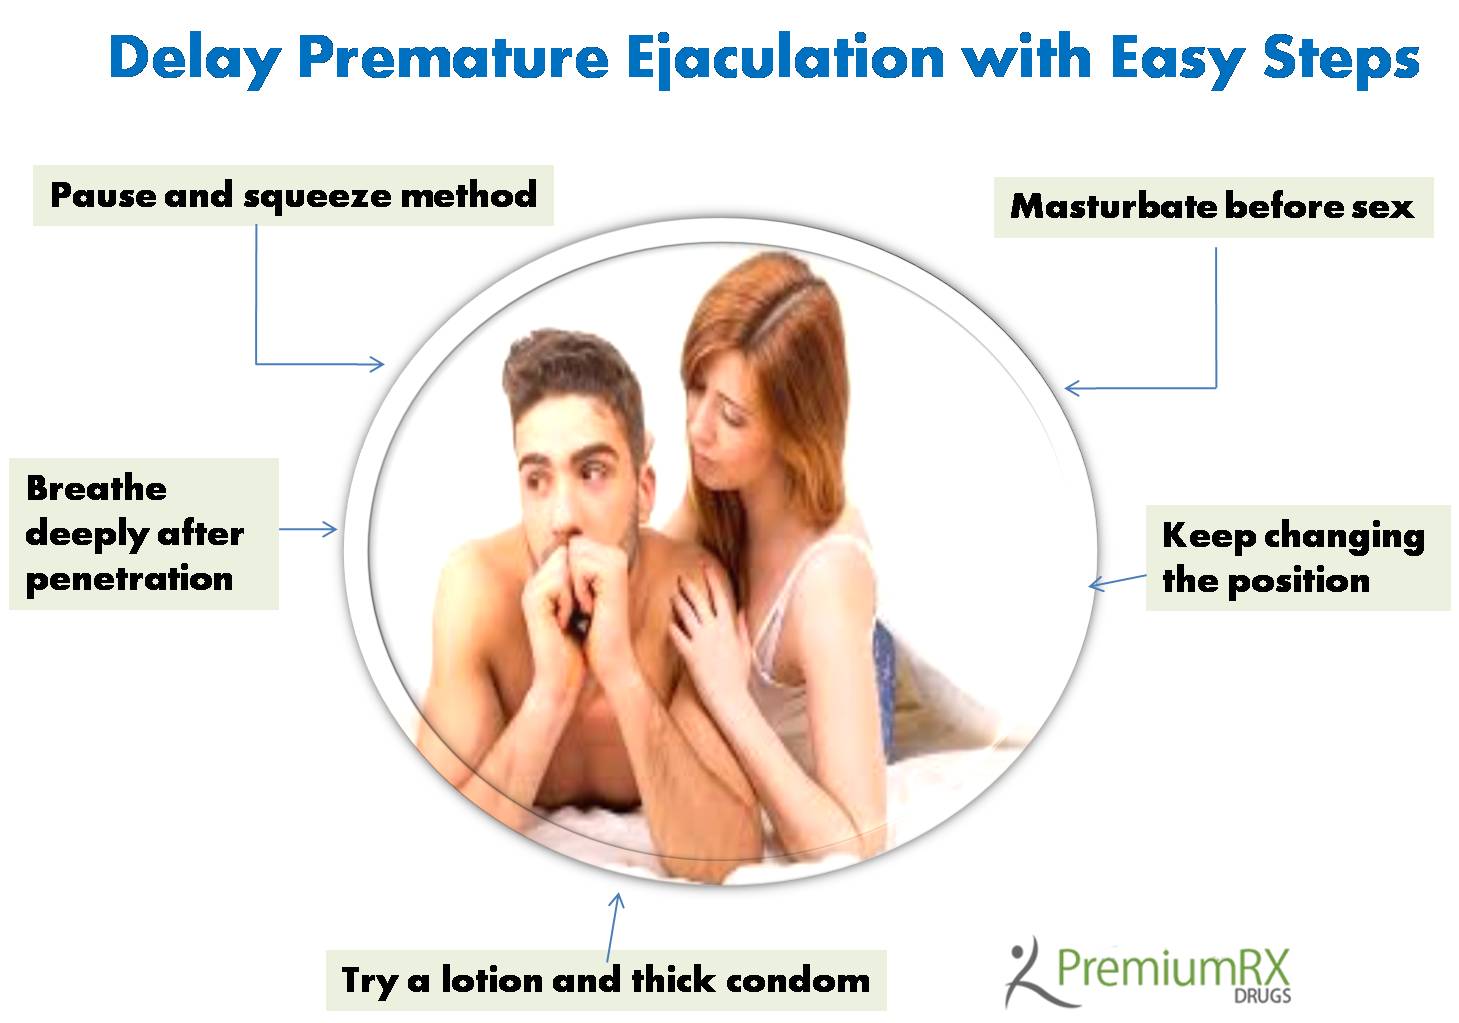 Delay Premature Ejaculation with Easy Steps